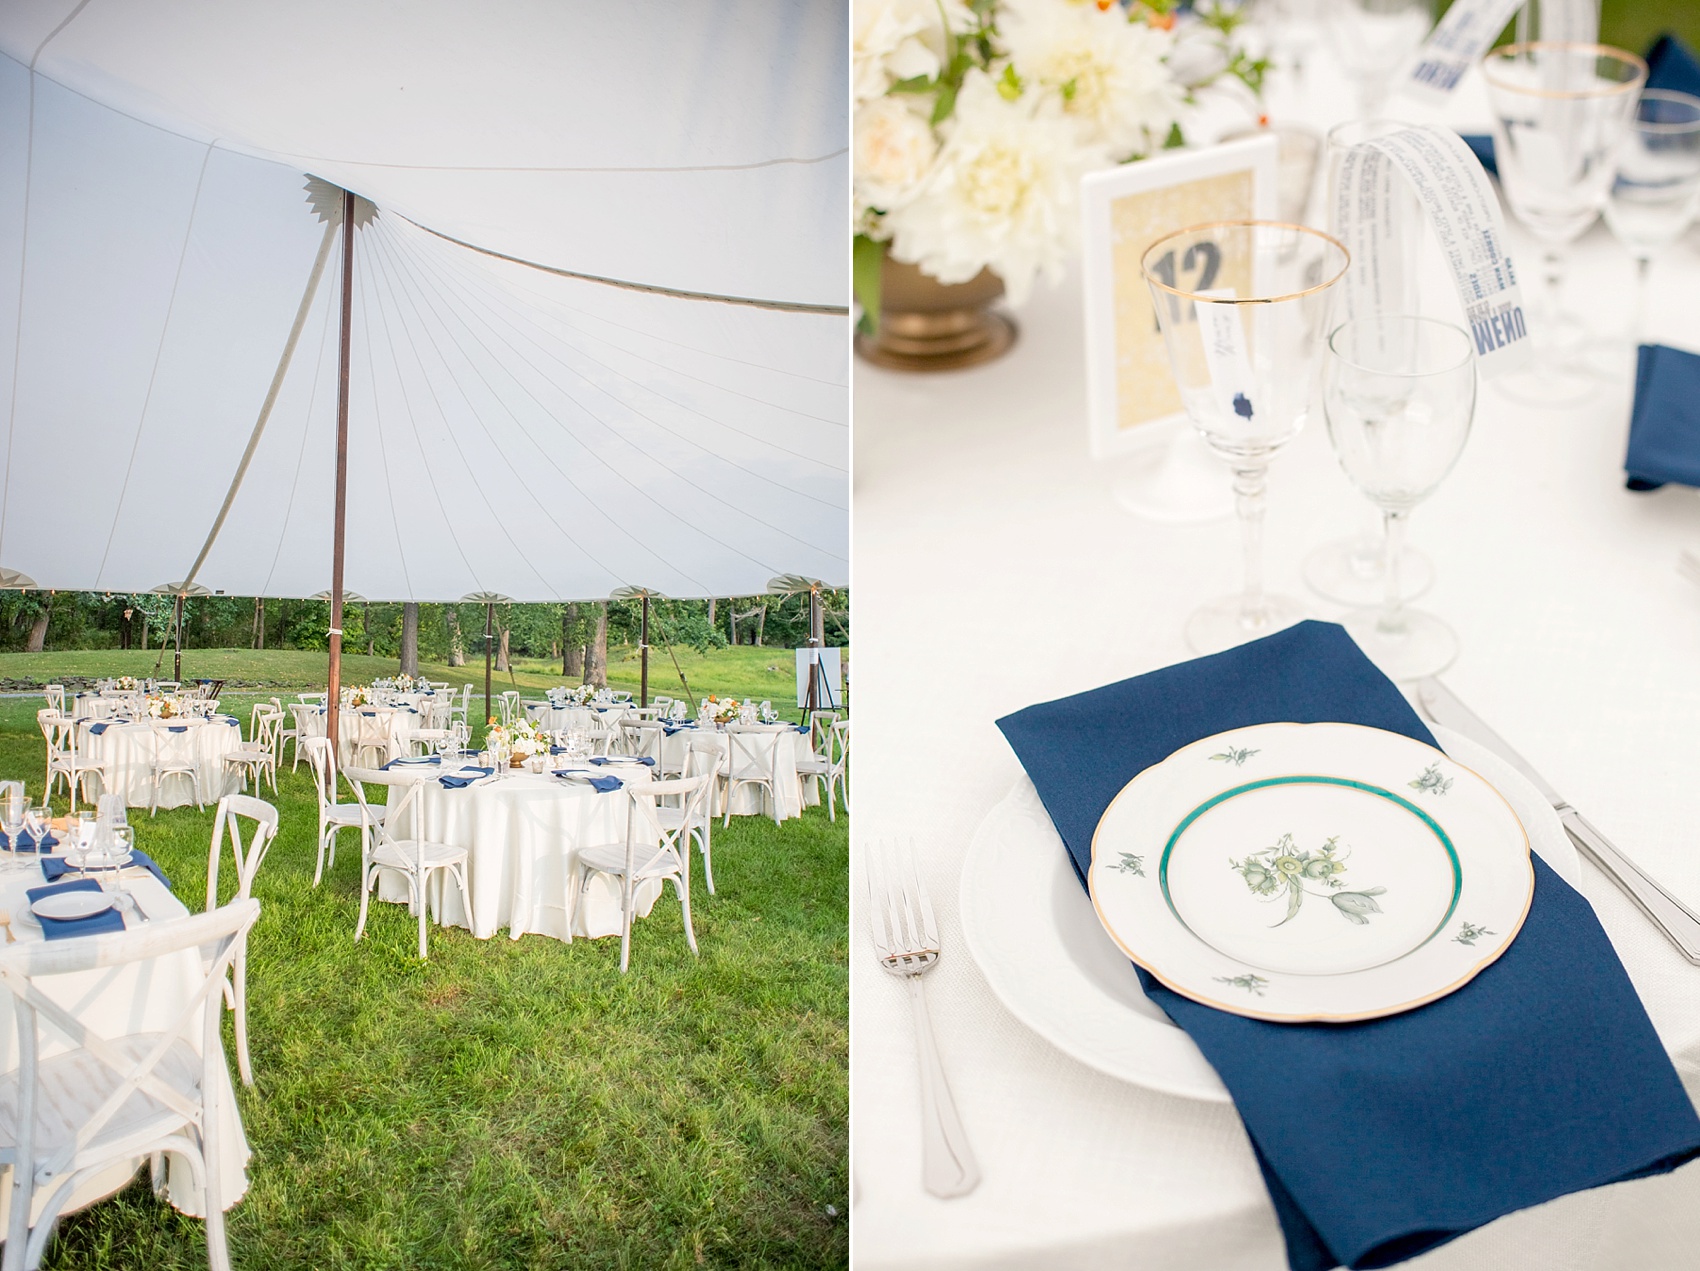 NY wedding at Southwood Estate. Images by Mikkel Paige Photography, NYC wedding photographer. Cream and blush bridesmaids and wildflower bouquets of white, blue, green and orange by Sachi Rose. Tented lake front reception with blue linens and vintage plates, and orange and blue flowers.